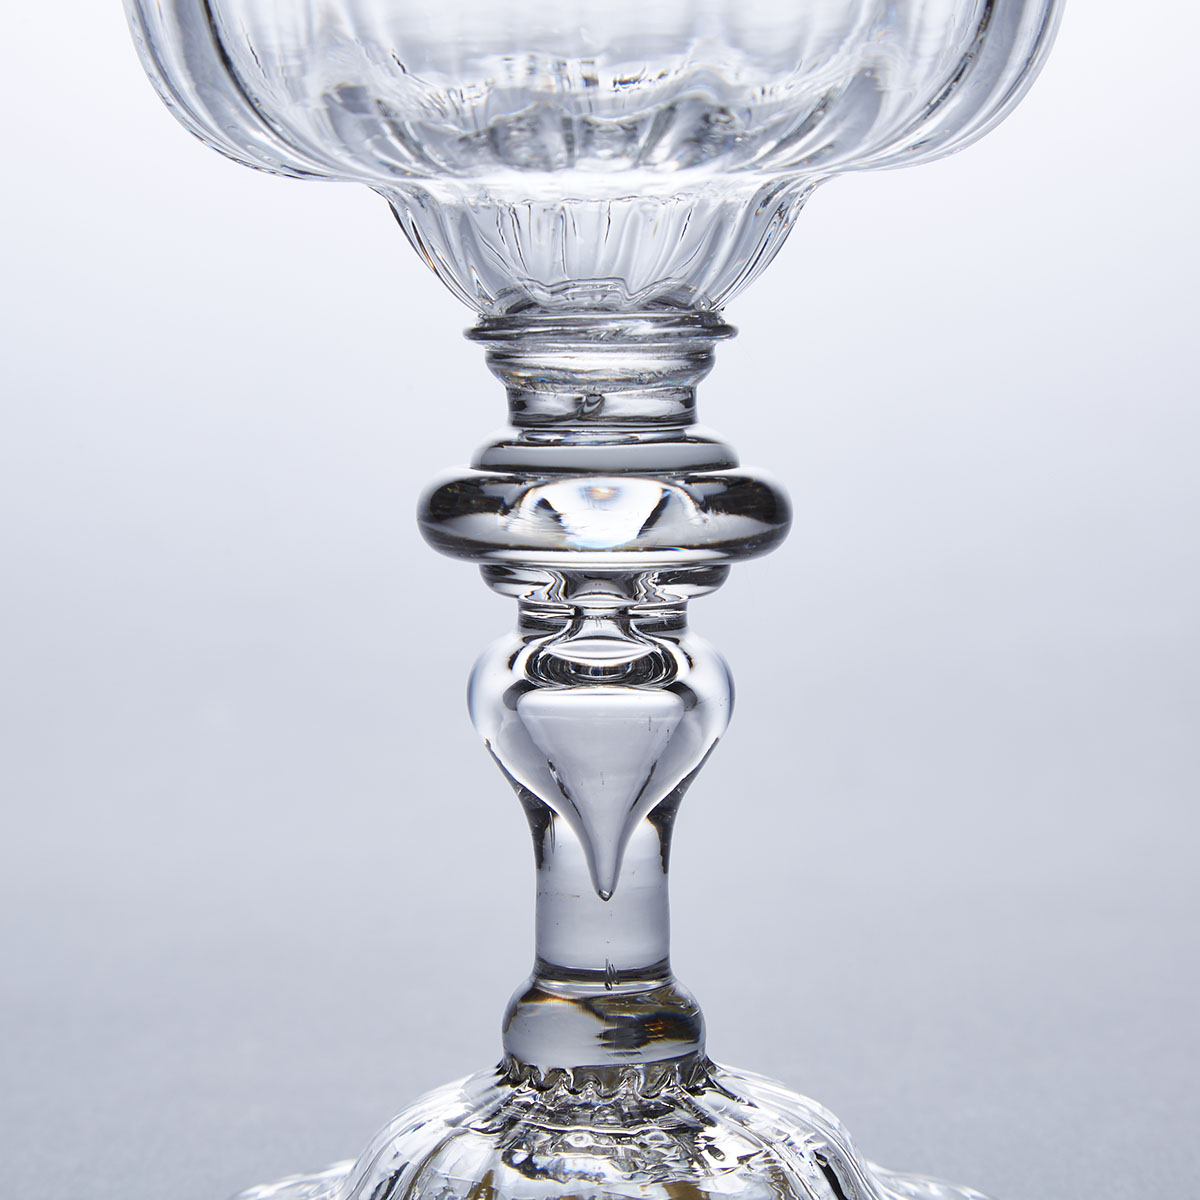 English Knopped Hollow Inverted Baluster Stemmed Sweetmeat or Champagne Glass, mid-18th century